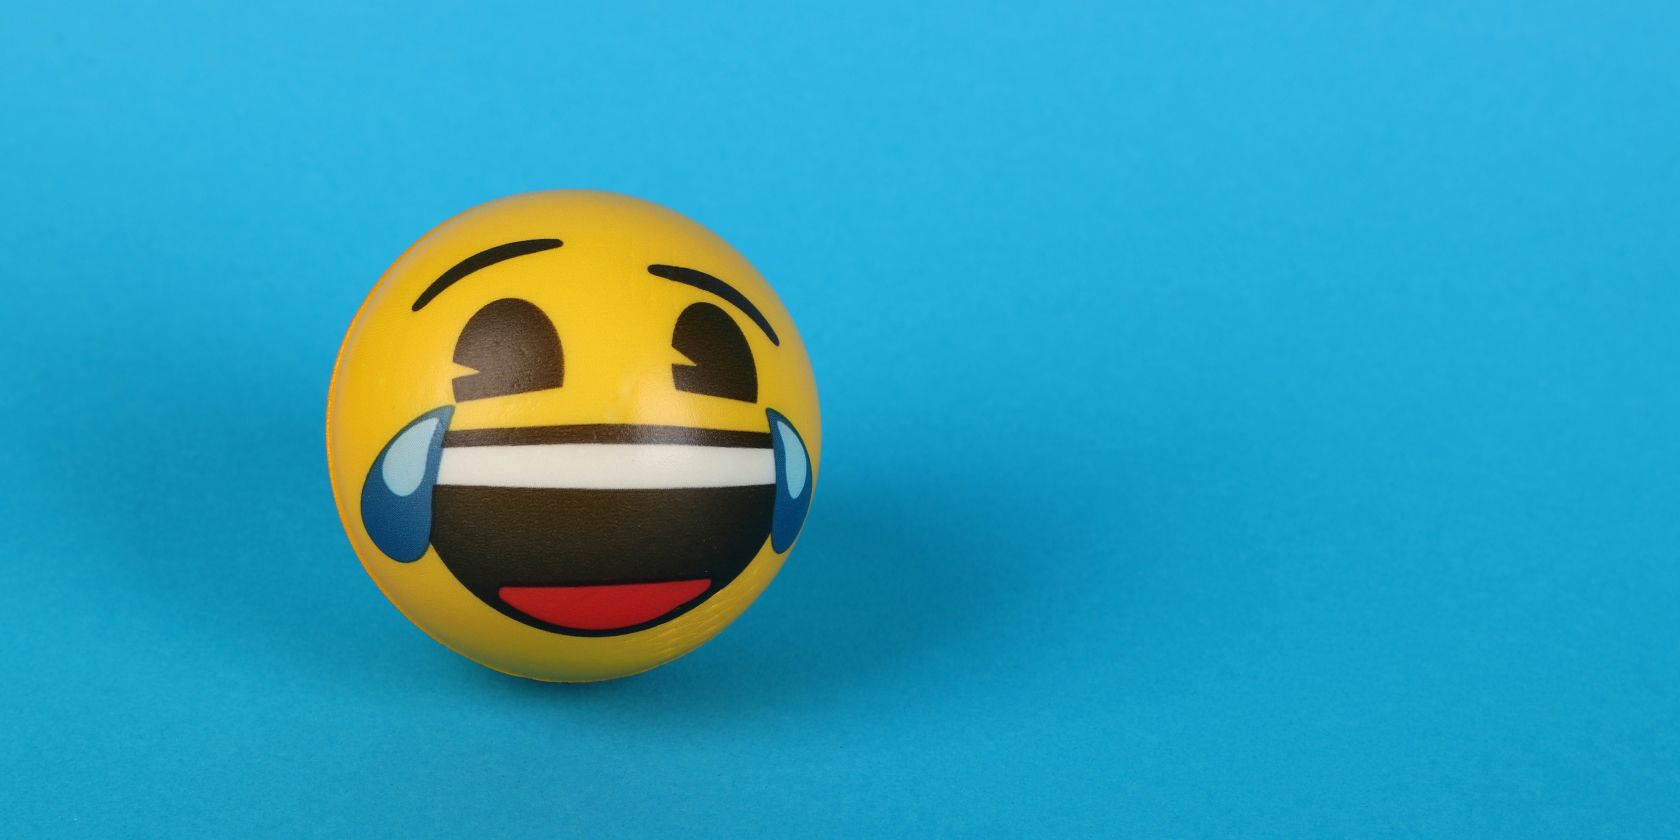 Yellow ball with laughing expression painted on